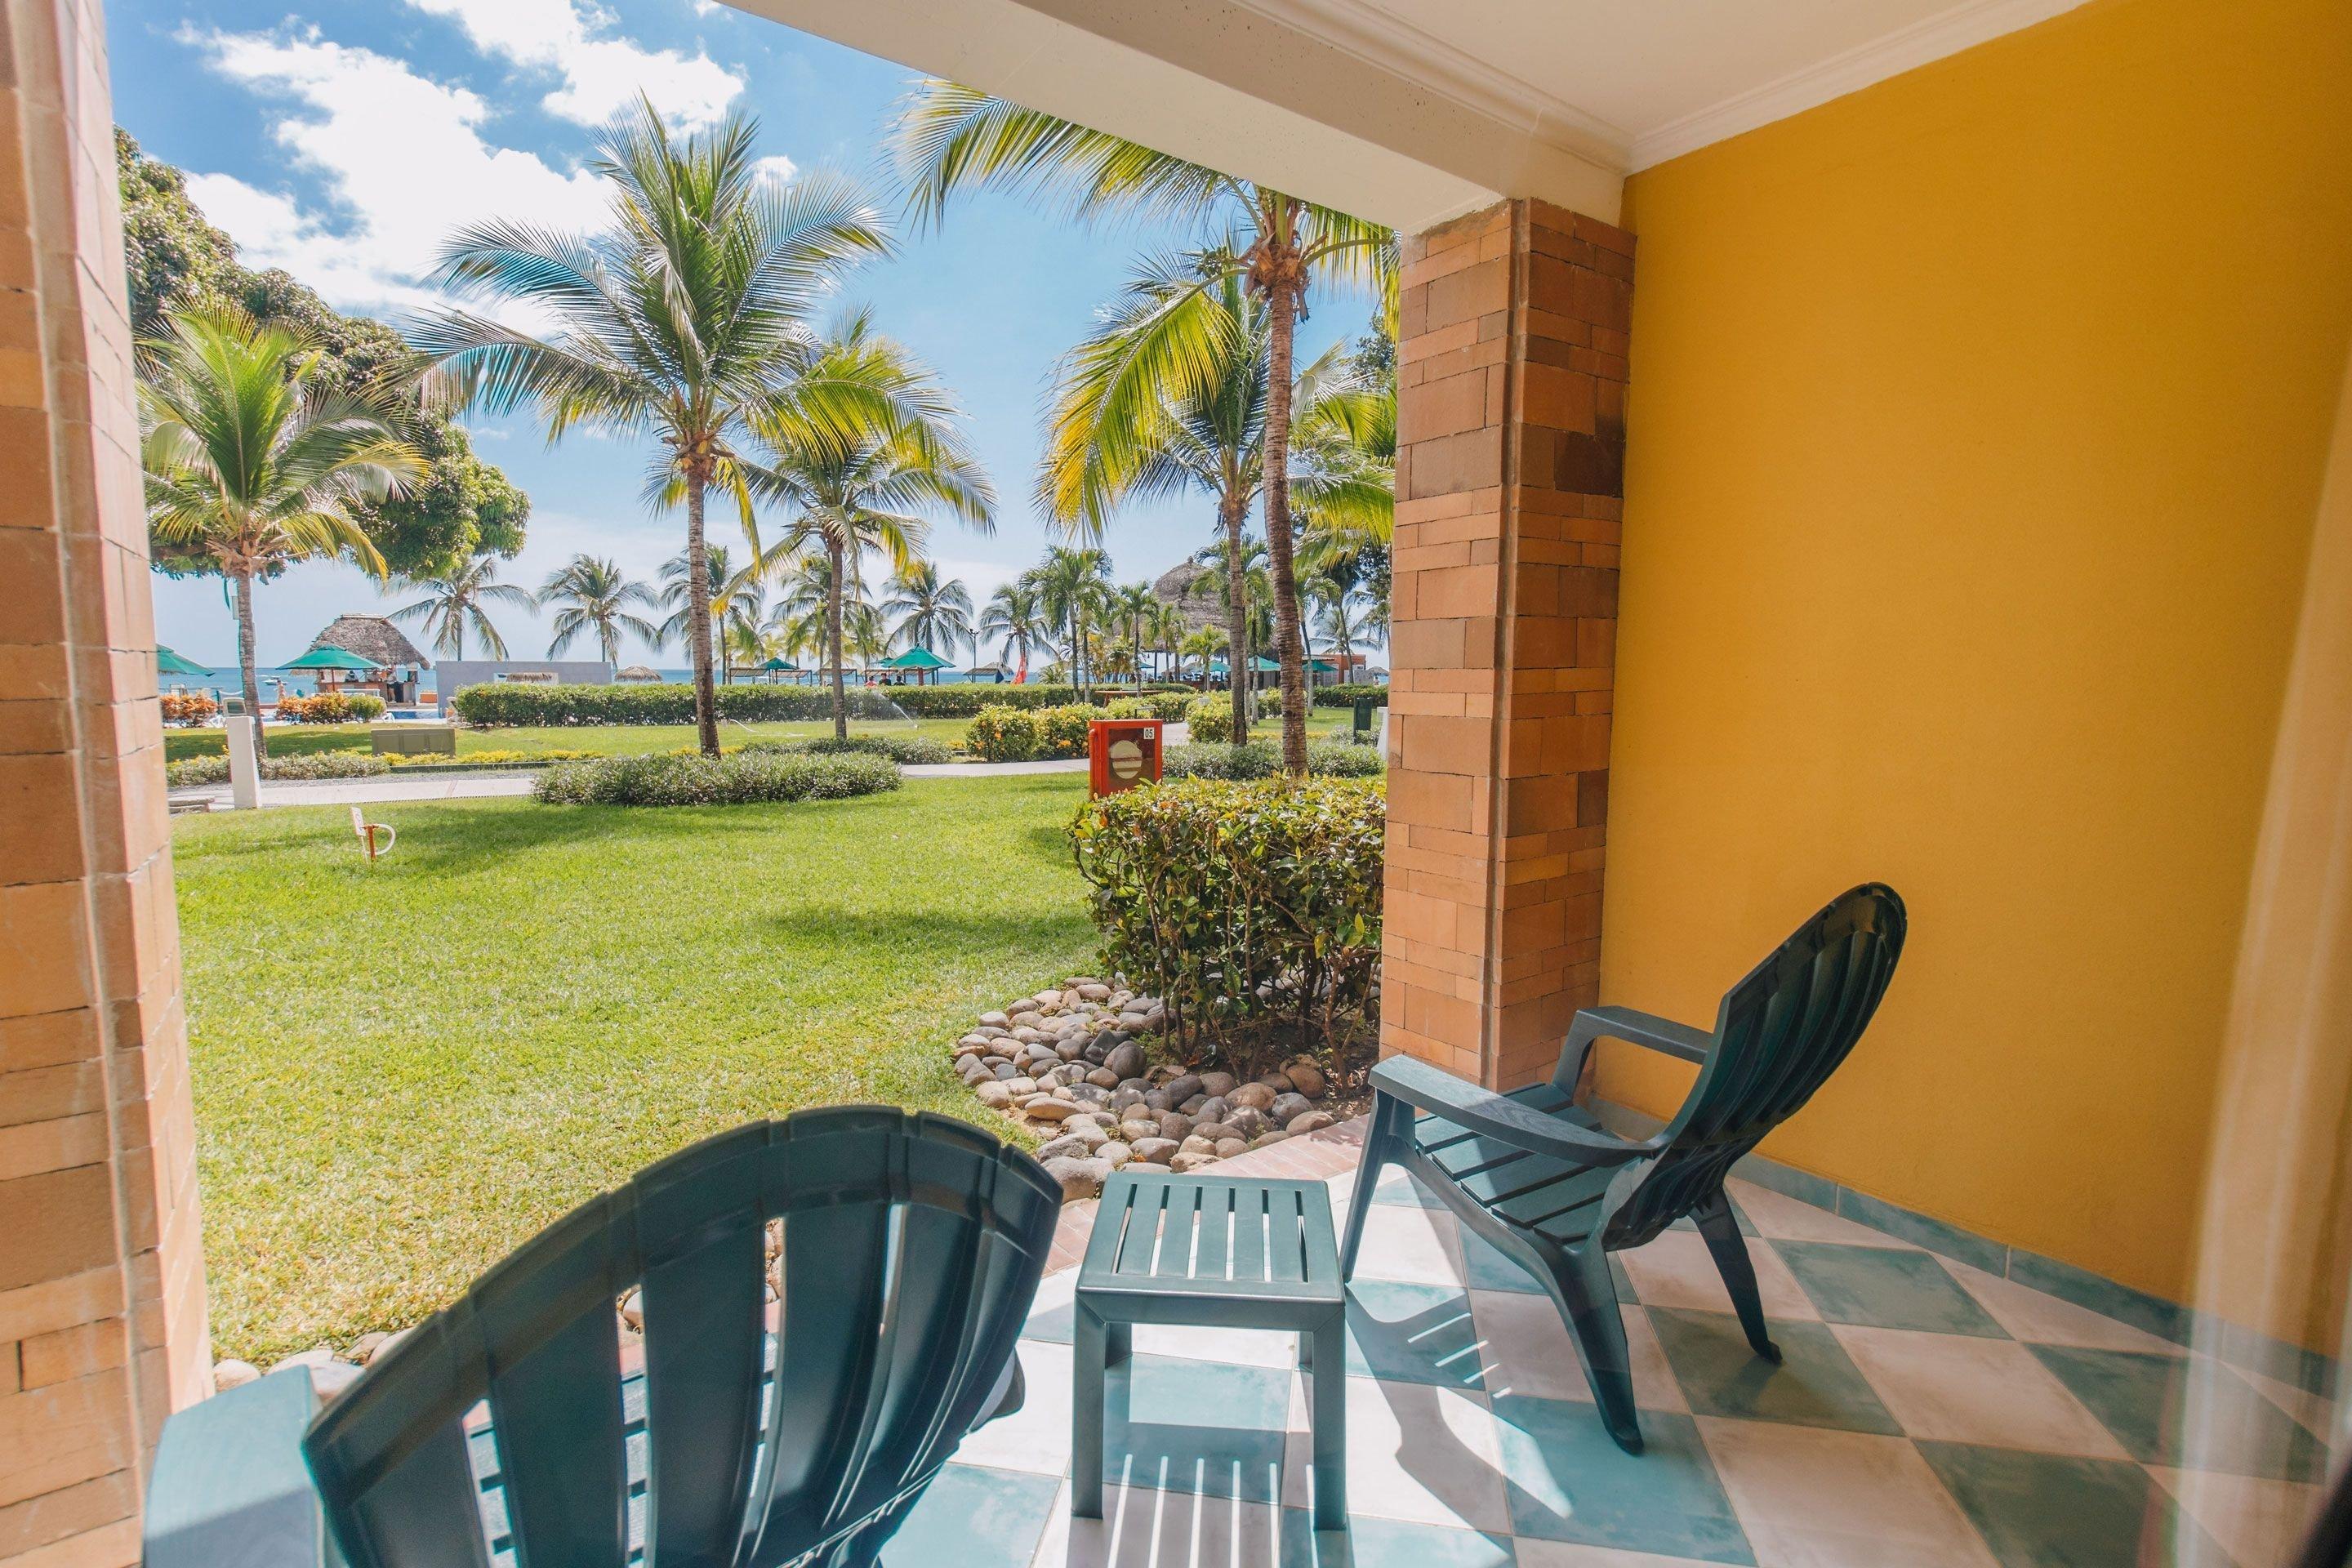 1 king bed or 2 double beds, sofa bed, free wi-fi, minibar included, satellite tv, telephone, toilet, shower, hairdryer, balcony. Views to the Ocean.